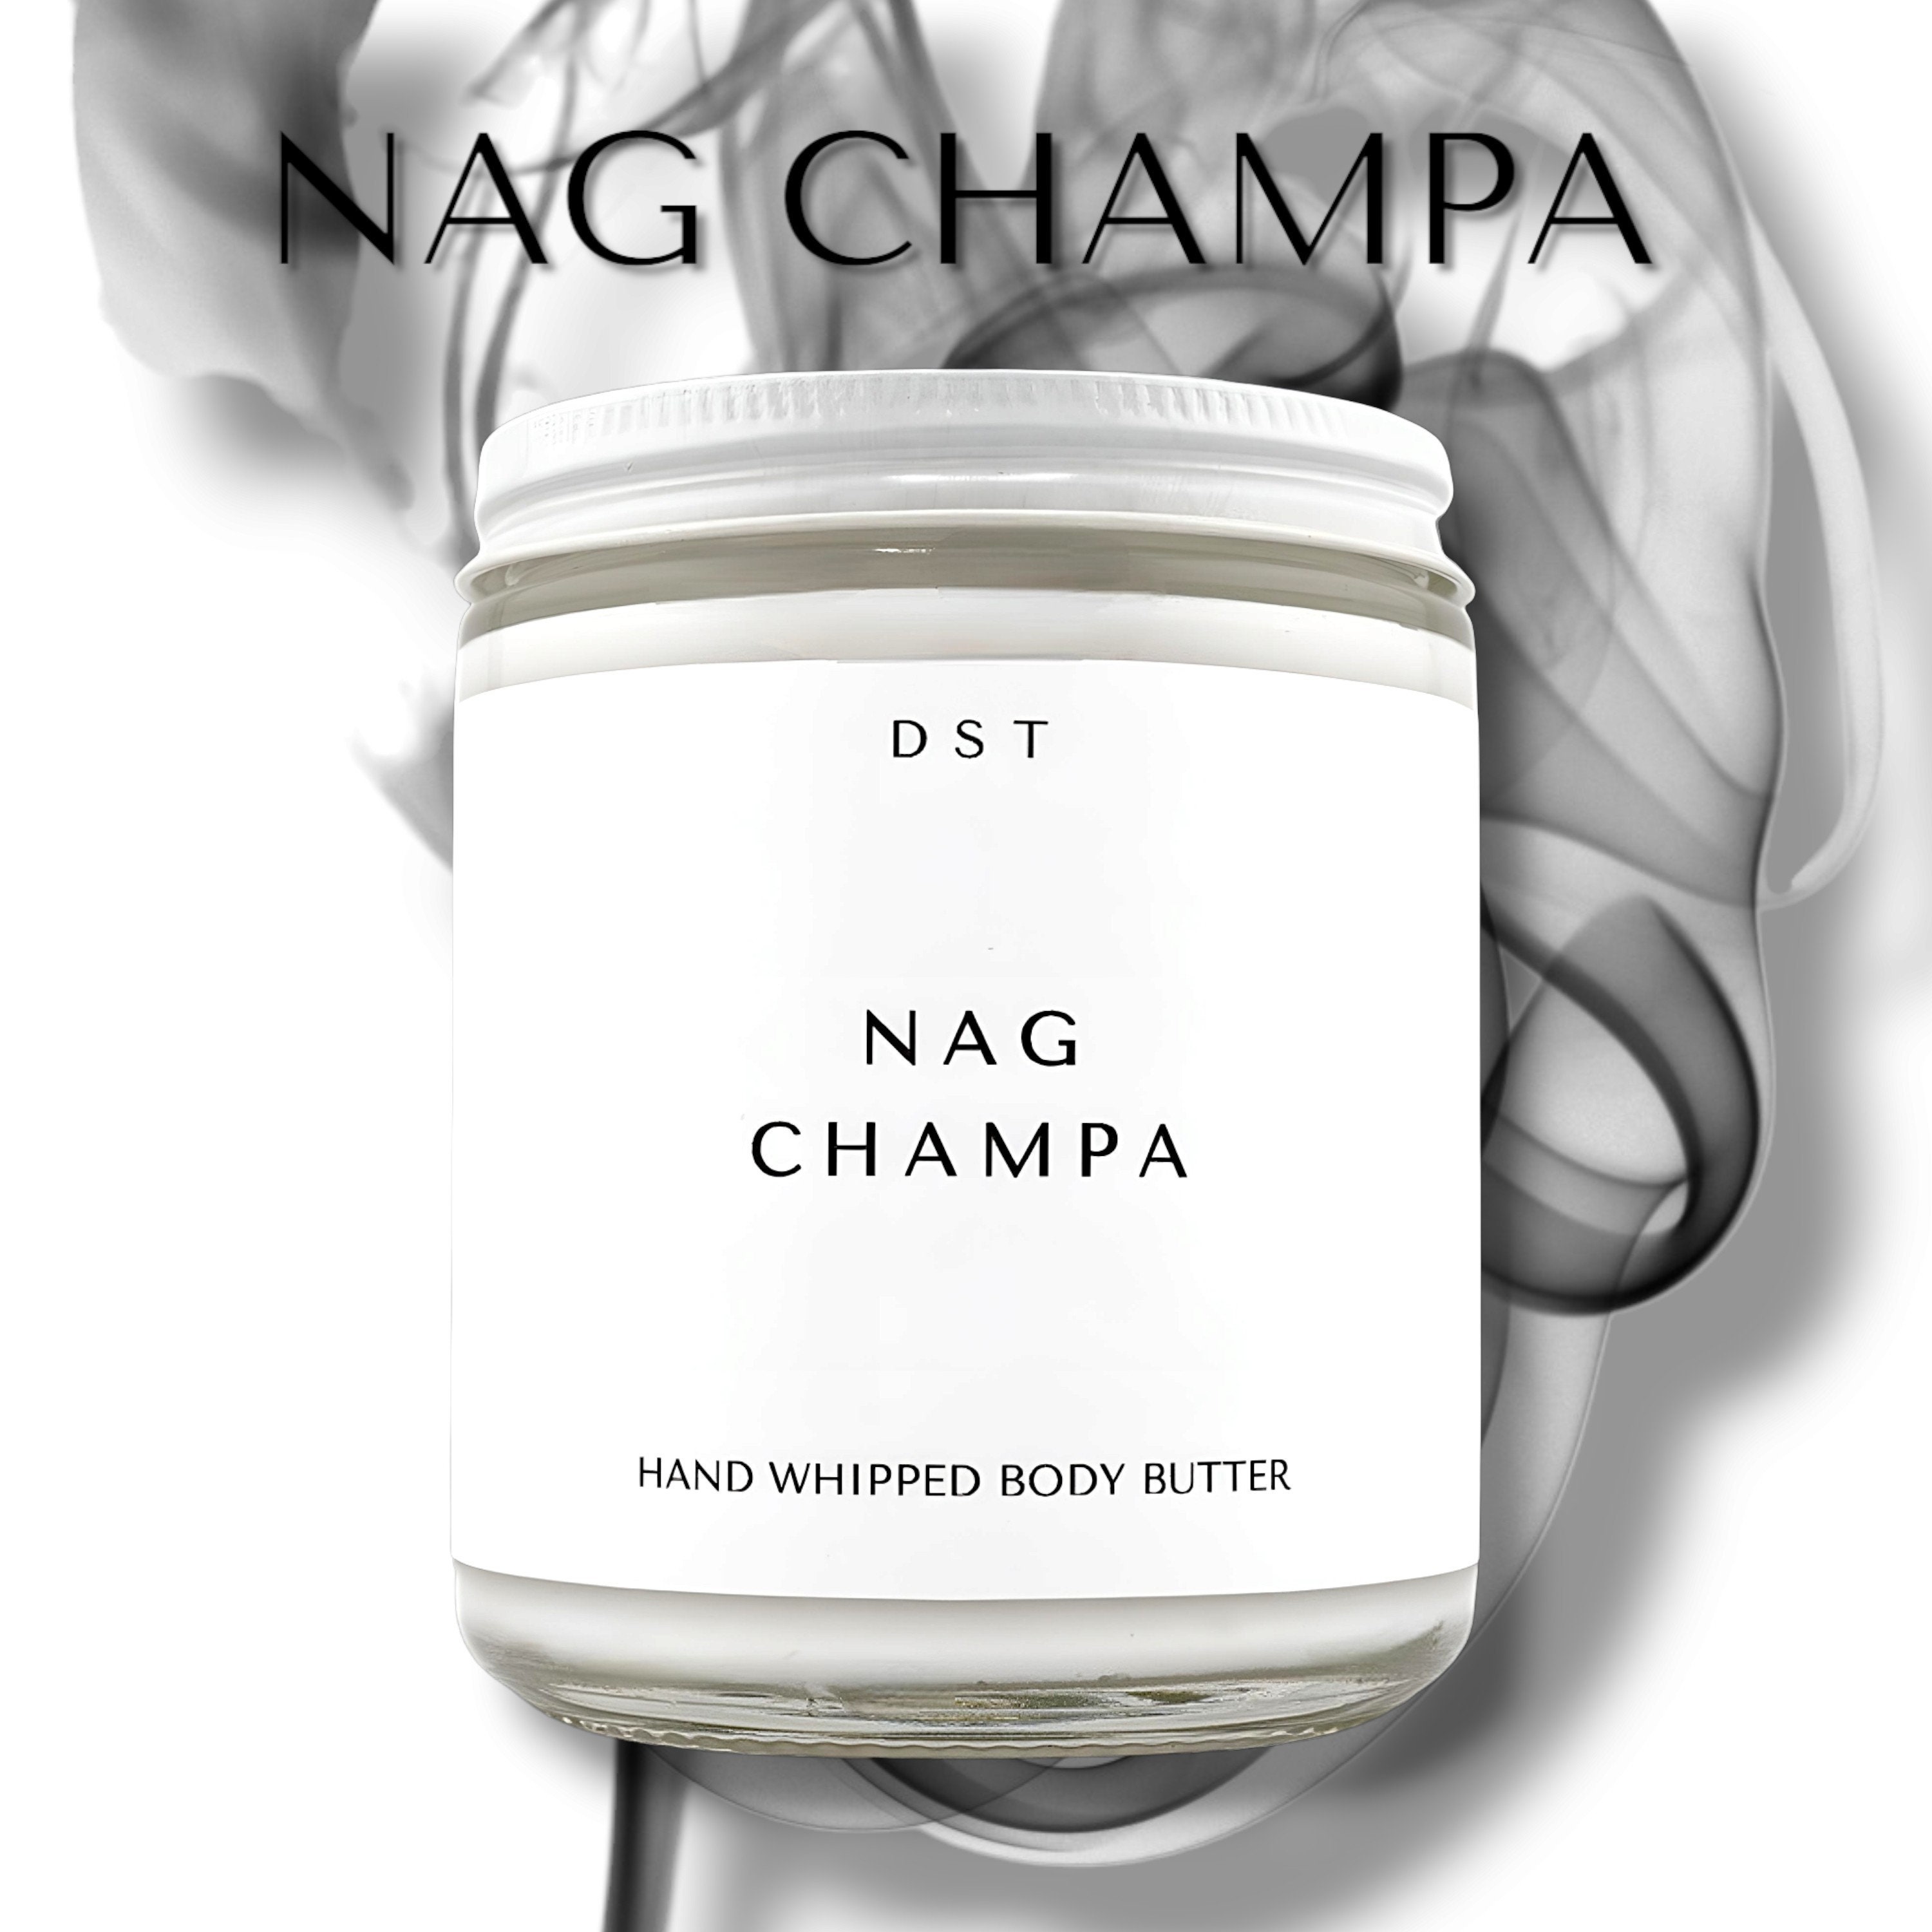  Nag Champa handmade body lotion - all natural, ultra-rich  Avocado oil, blend of sandalwood and champak (2 oz) : Handmade Products